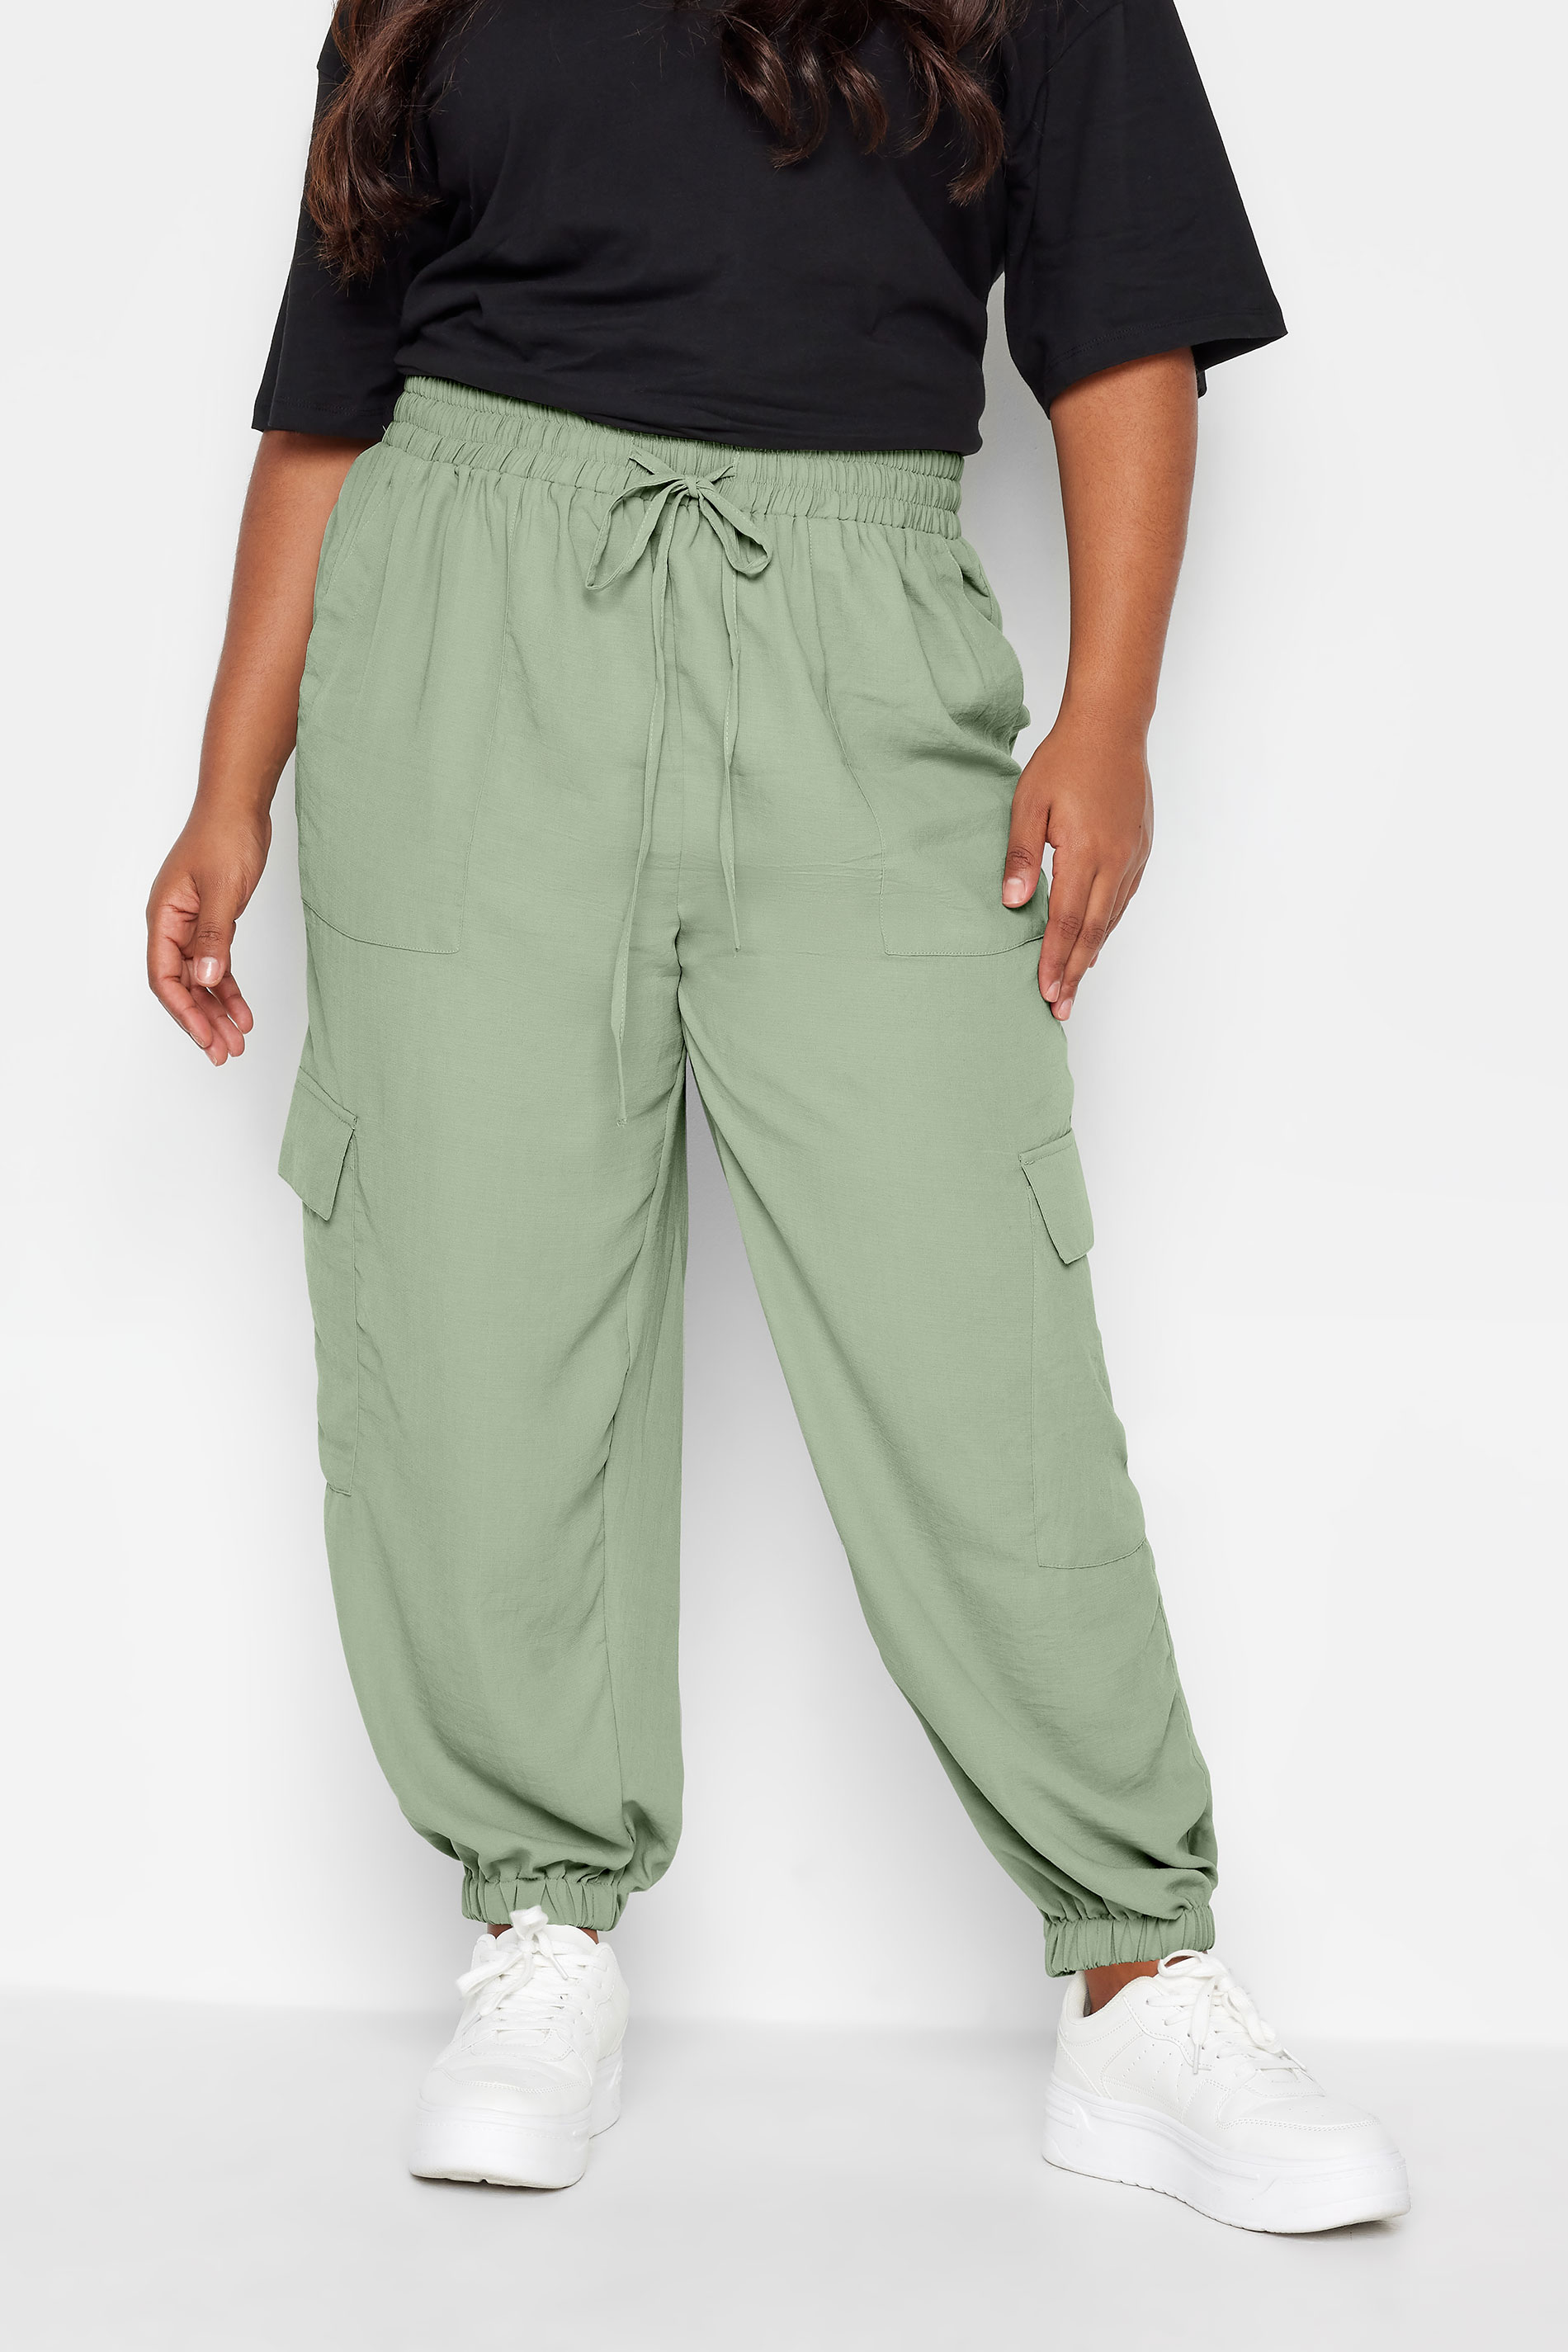 LIMITED COLLECTION Plus Size Khaki Green Cargo Pocket Trousers 1